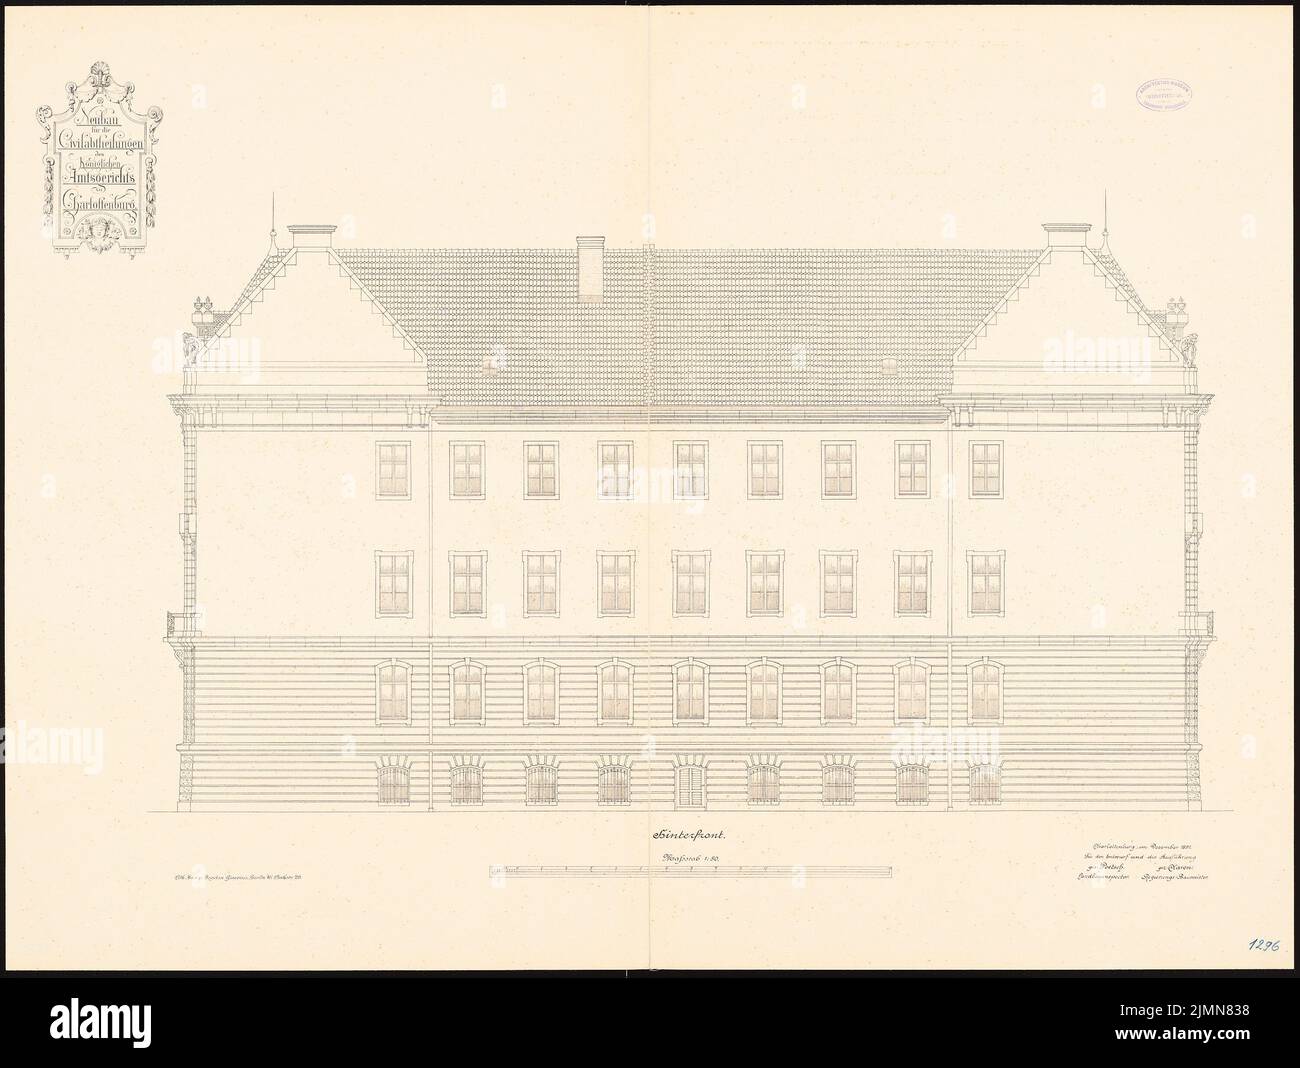 Poetsch Otto (1848-1915), District Court Berlin-Charlottenburg. Civil departments (1895-1897): rear view 1:50. Lithograph, 78.9 x 104.8 cm (including scan edges) Stock Photo